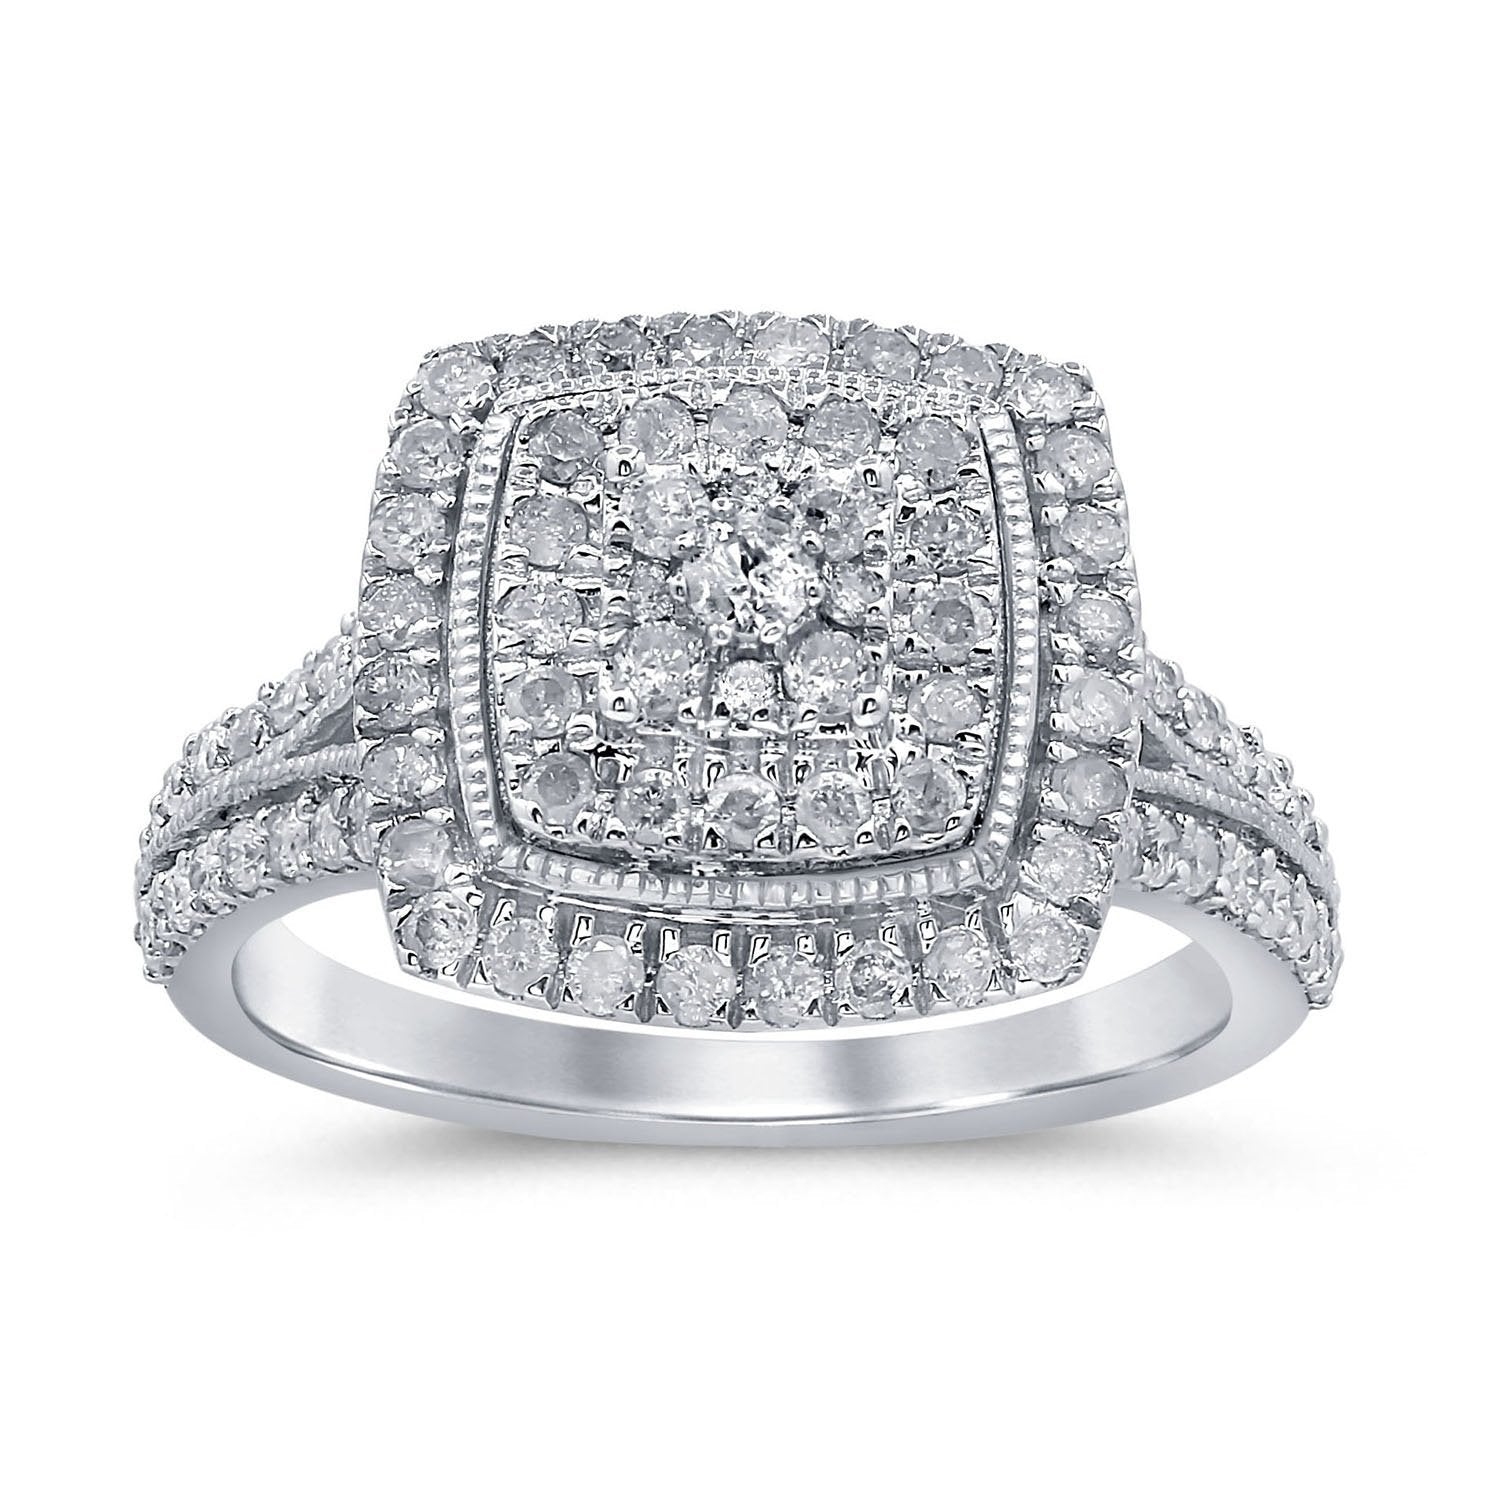 Double Halo Split Shoulder Ring with 1.00ct of Diamonds in Sterling Silver Rings Bevilles 